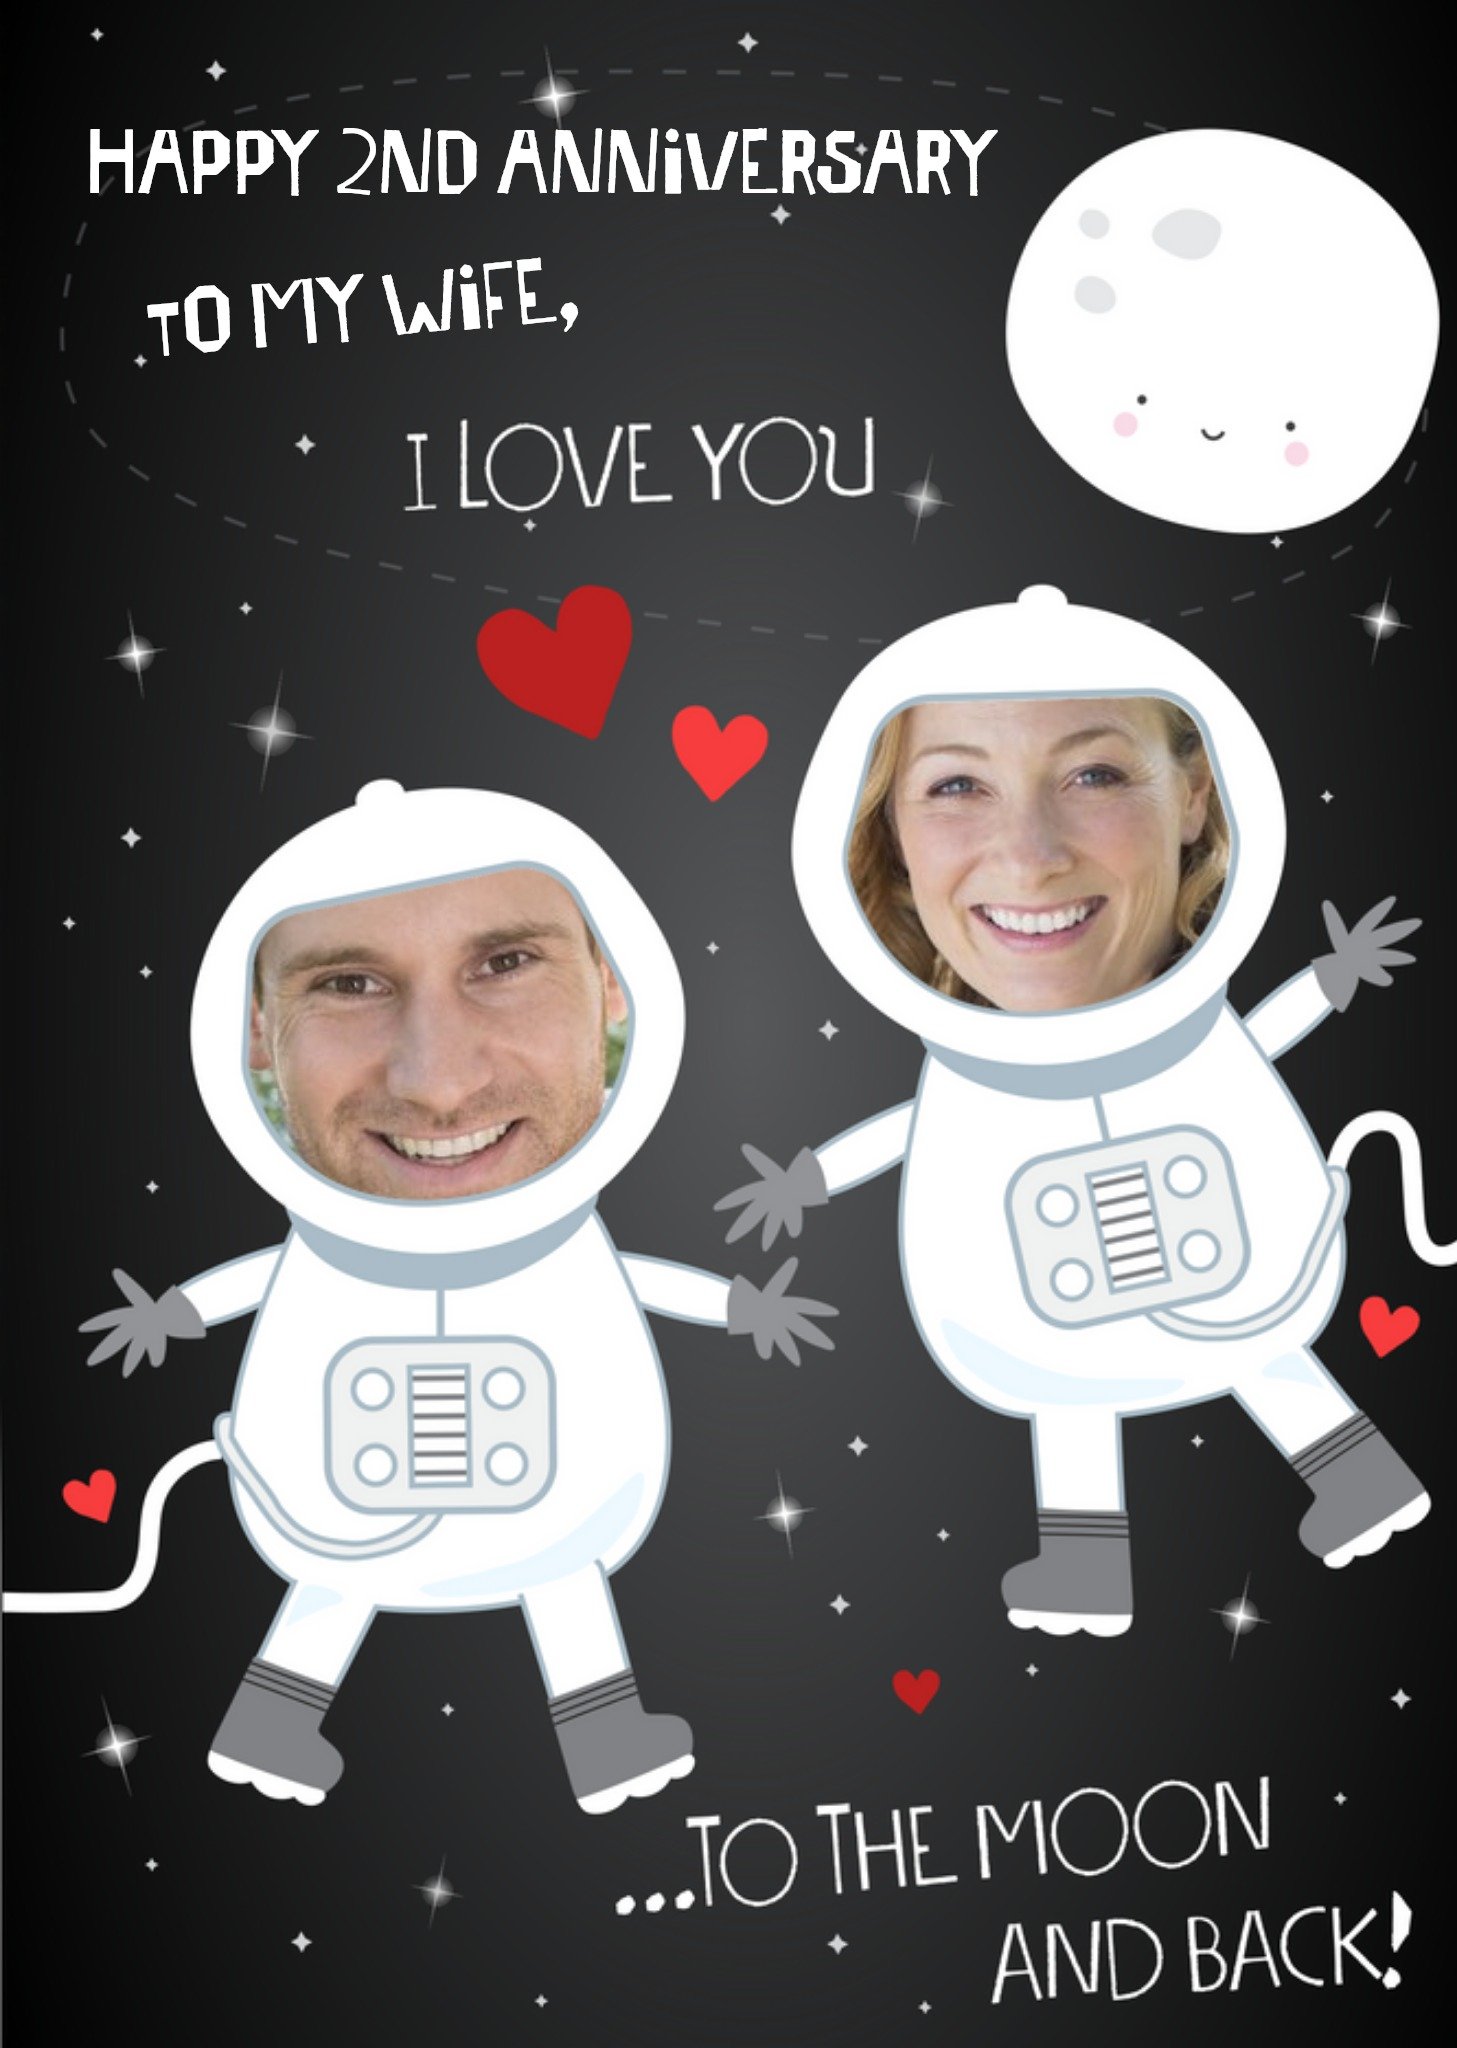 Moonpig Love You To The Moon And Back Photo Upload Anniversary Card For Wife Ecard